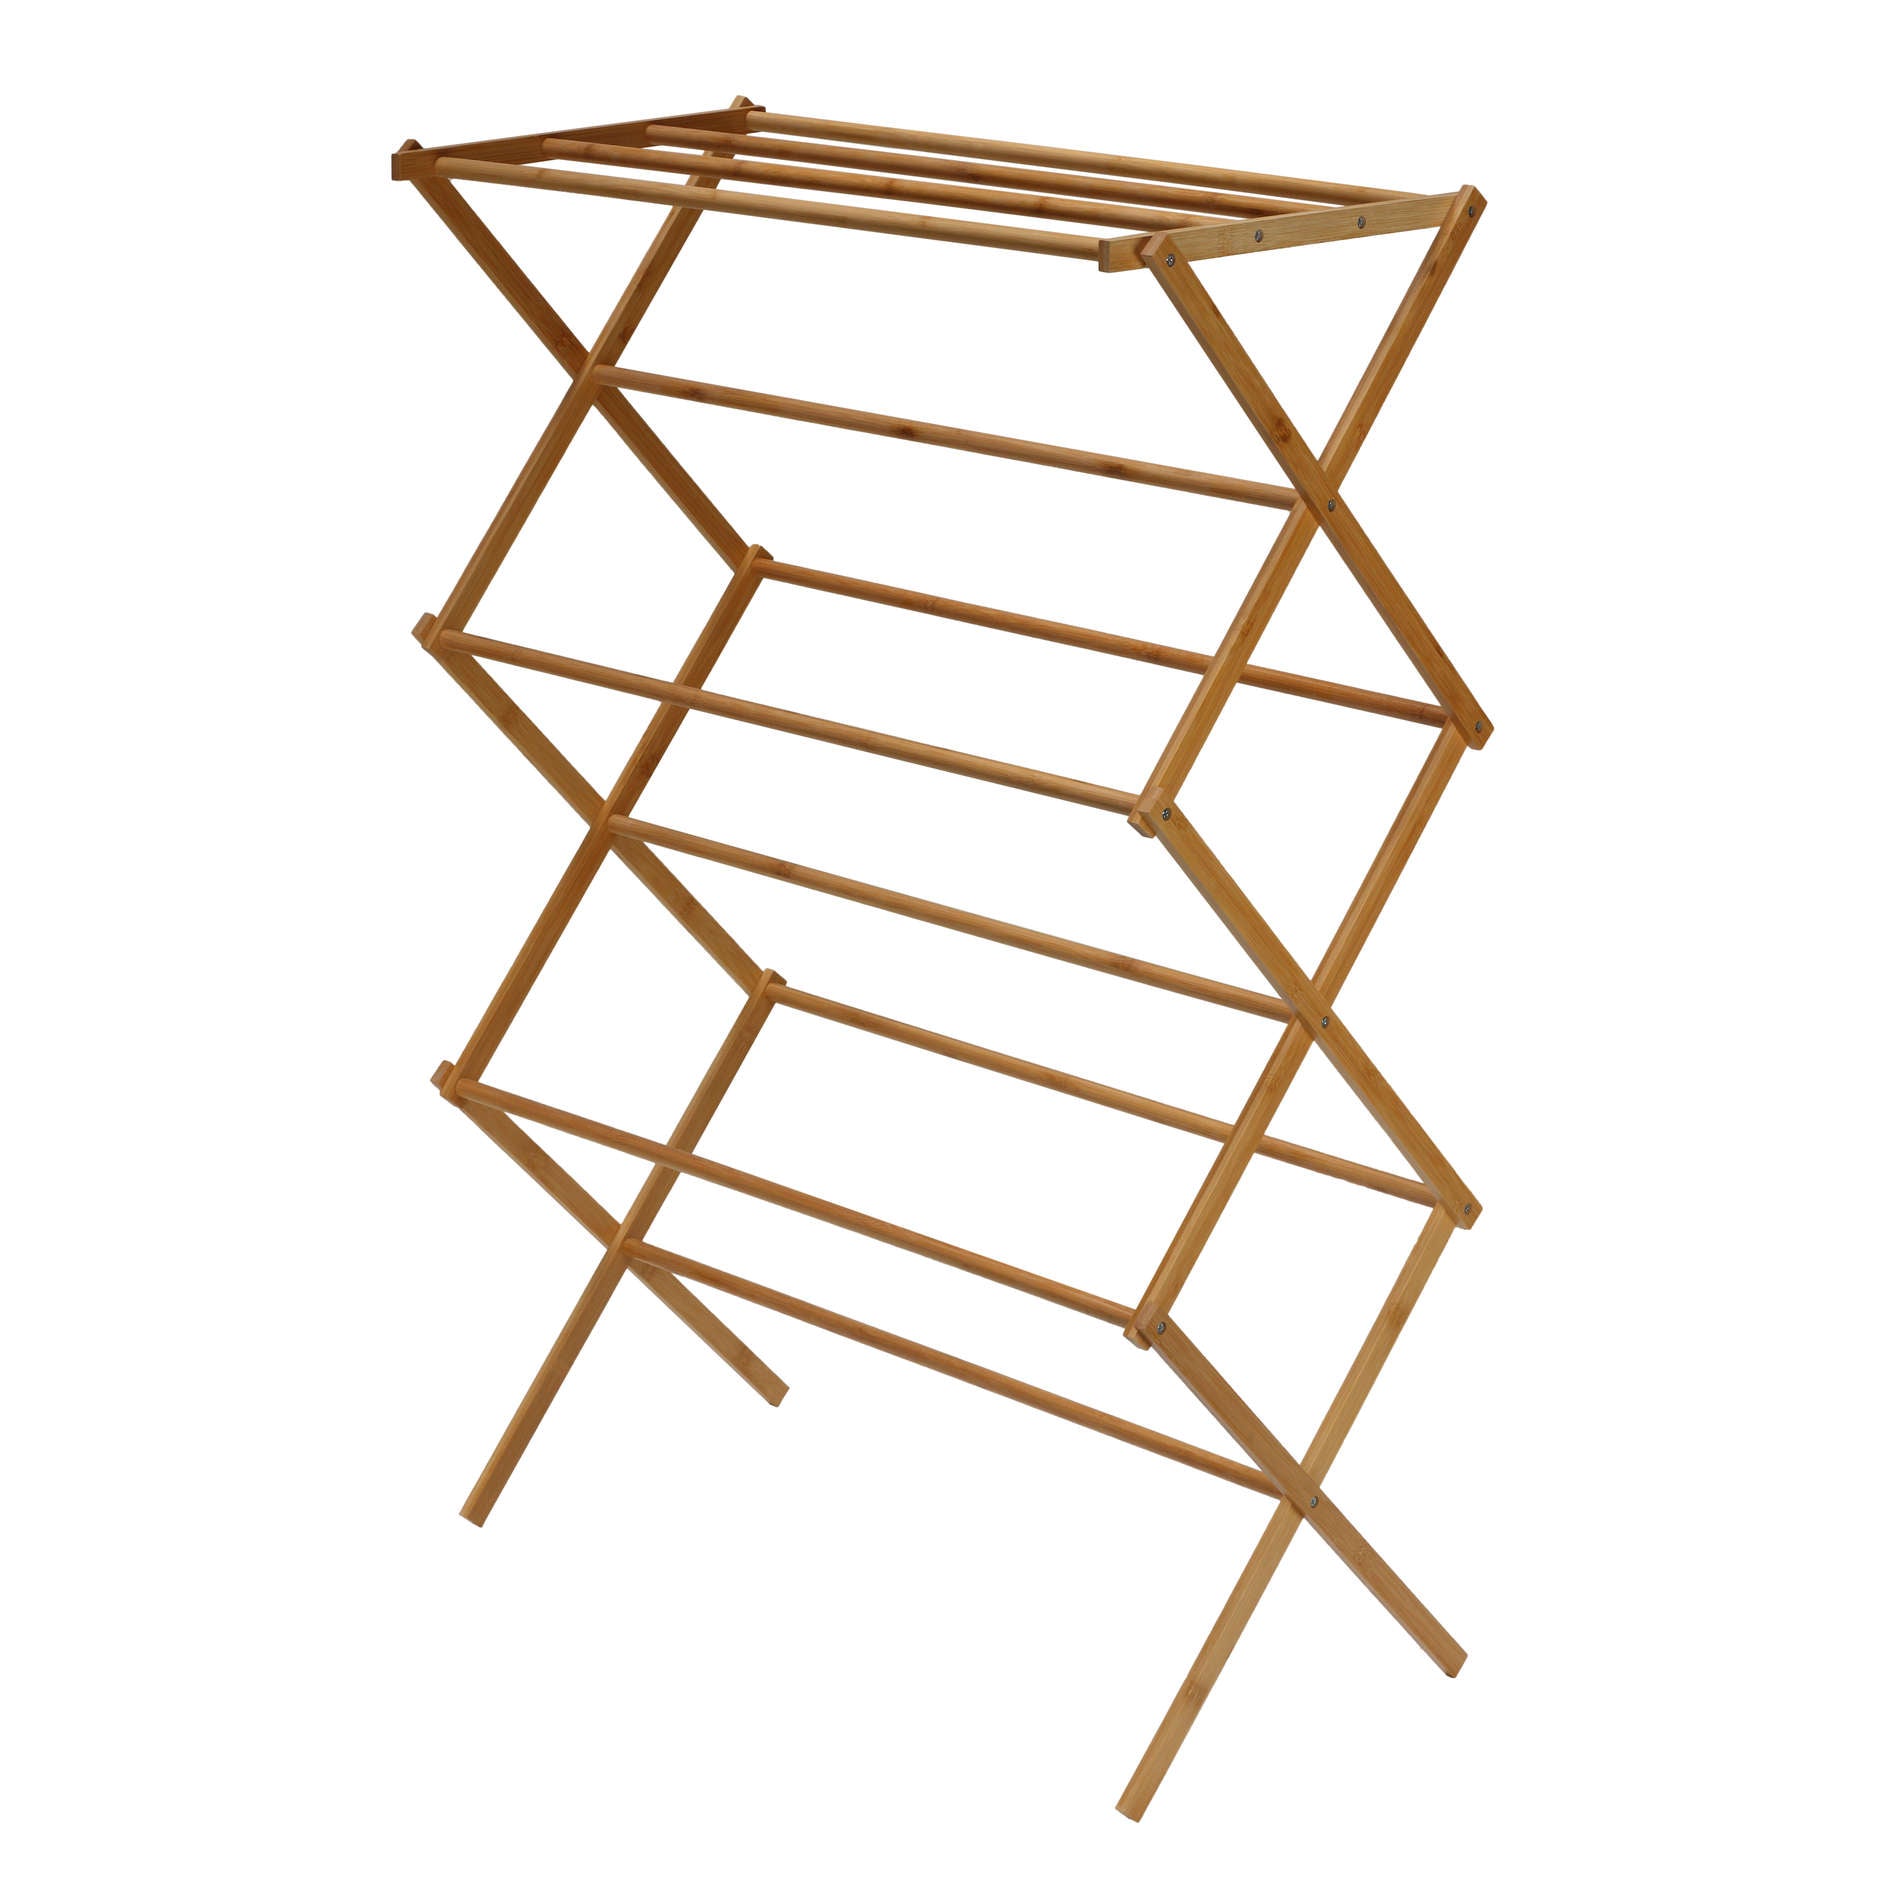 Cortesi Home Drying Rack in Natural Bamboo "Eli", Portable & Collapsible 29x15x43